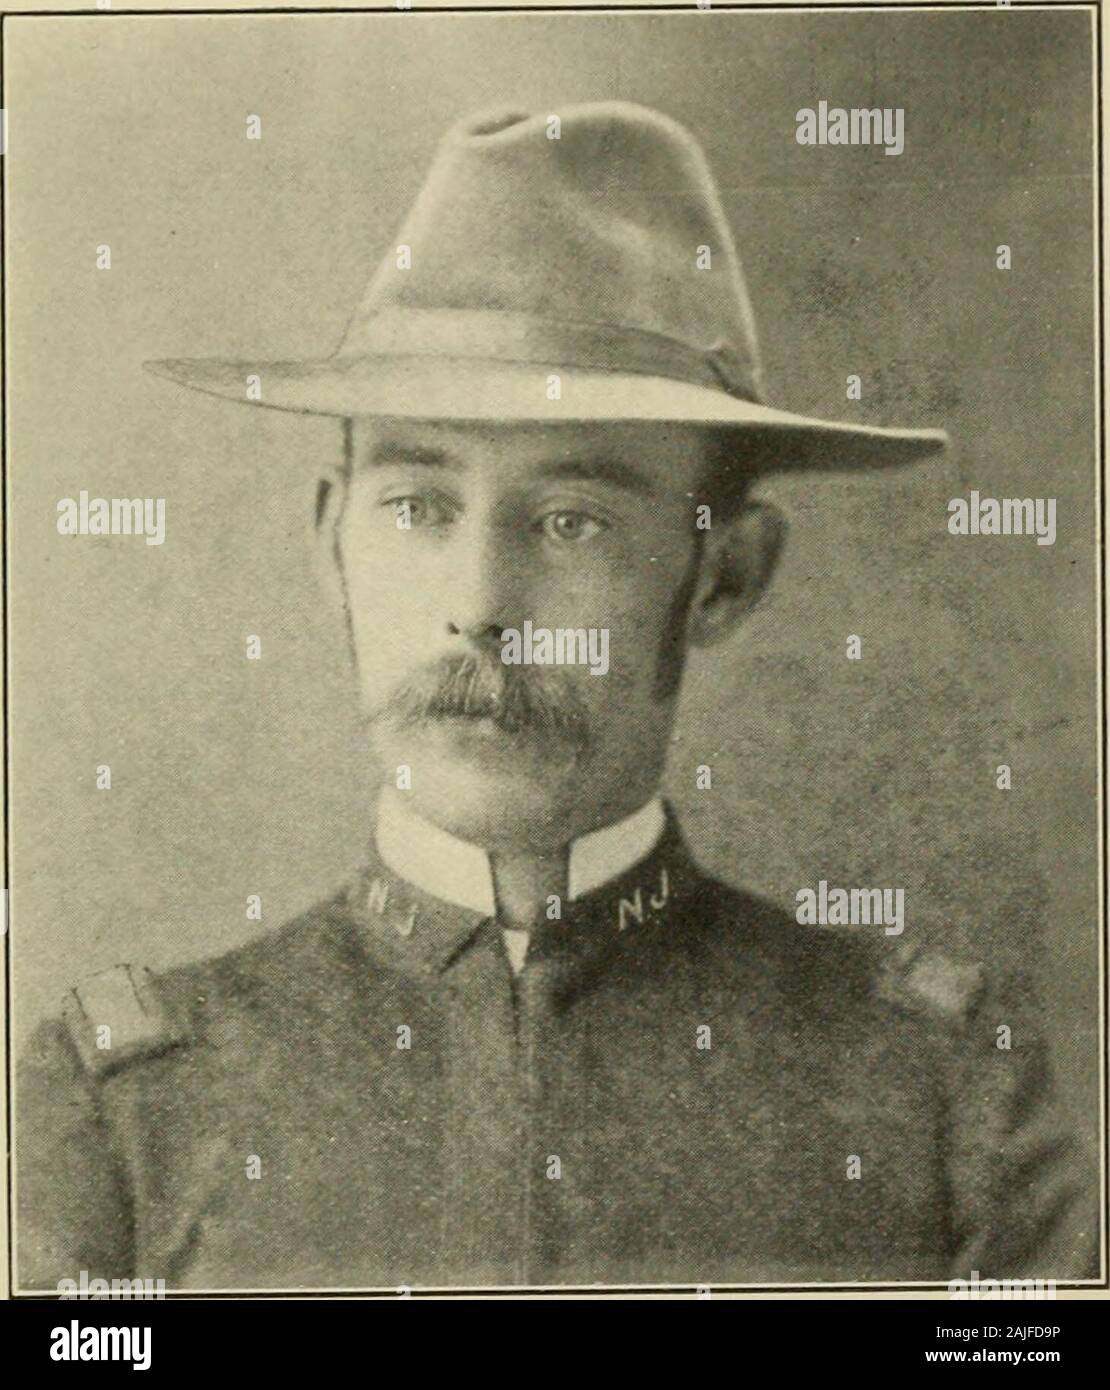 Record of Fourth New Jersey National Guard, Volunteer Infantry, Spanish-American War, 1898-1899. . r clothing §6.01.Henry Peck, Private. Residence, Woodbury, N. J. On special dutj- preparing camp at Greenville, S. C, November 2to 15, per R. S. O. No. 51, dated October 31, 1898. Sick in quarters September 5, 1898, in line of duty. Vaccinated November 30, 1898, successful. Due United States for clothing §3.42.Edward Pierson, Corporal. Residence, Woodbury, N. J, Vaccinated November 30, 1898, successful. Due United States for clothing $0.16.Henry H. Pine, Private. Residence, Woodbury, N. J. Muster Stock Photo